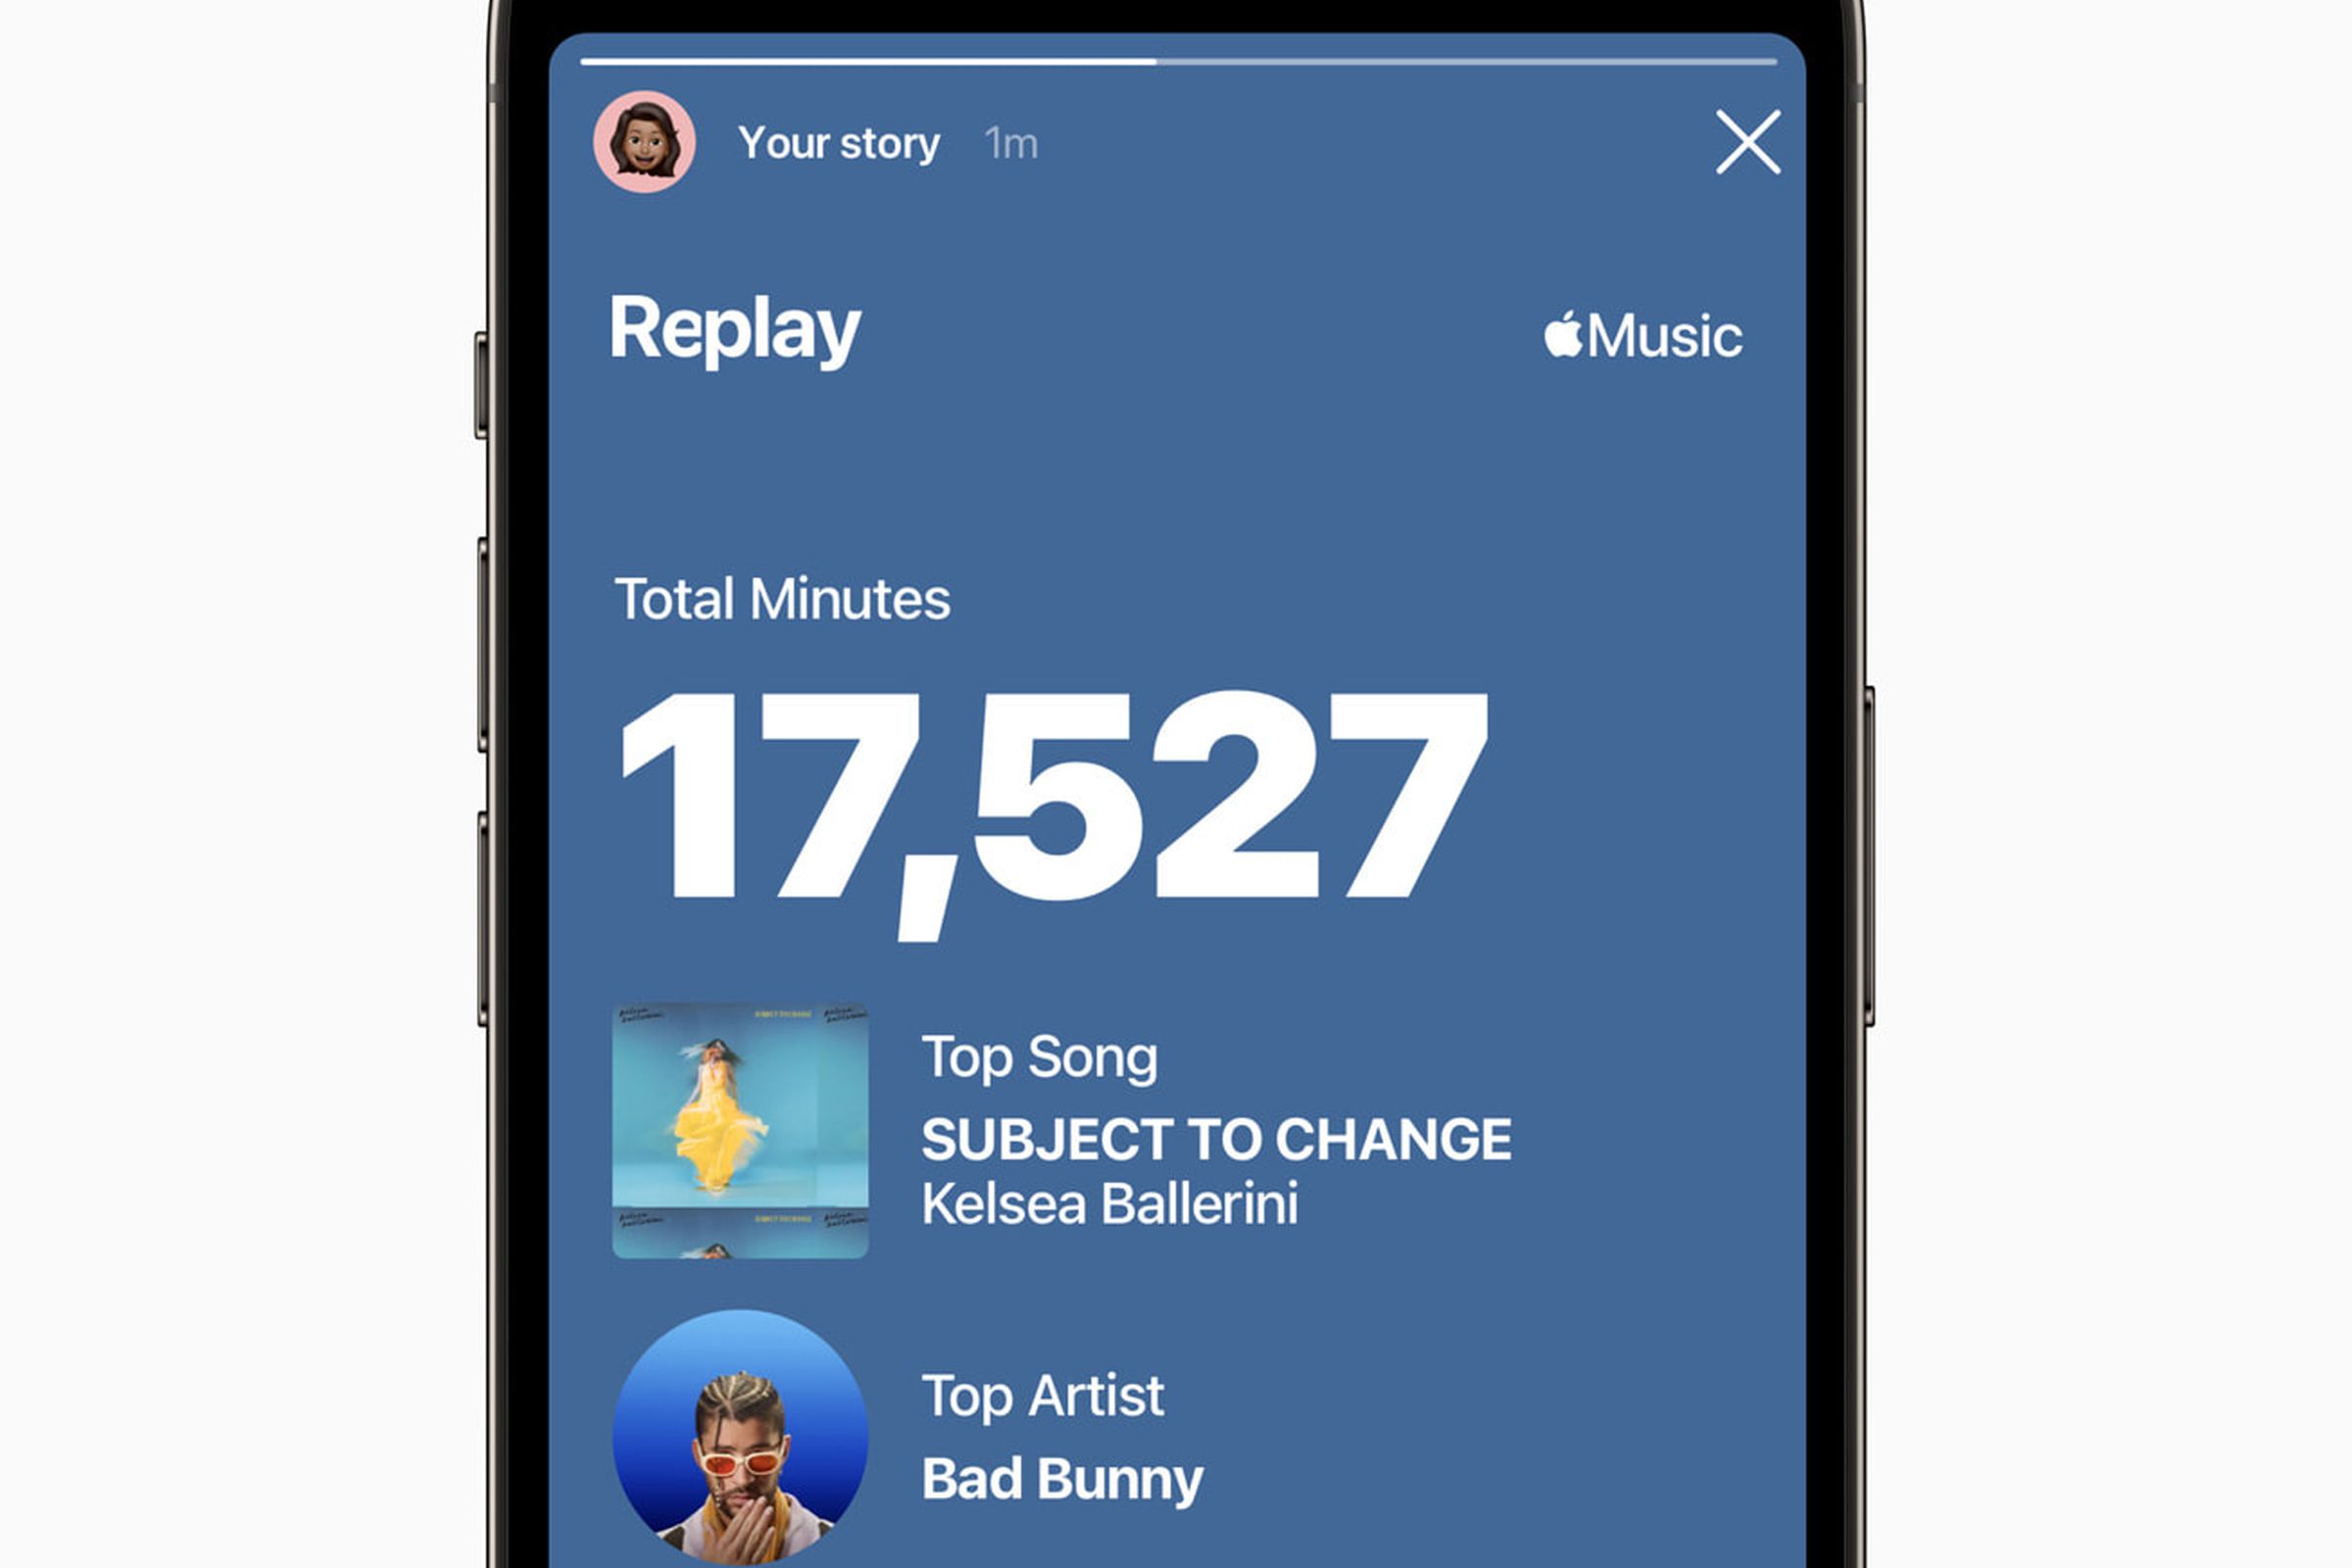 An iPhone screen showing Apple Music Replay, with total listening minutes and top songs, artists, and albums.